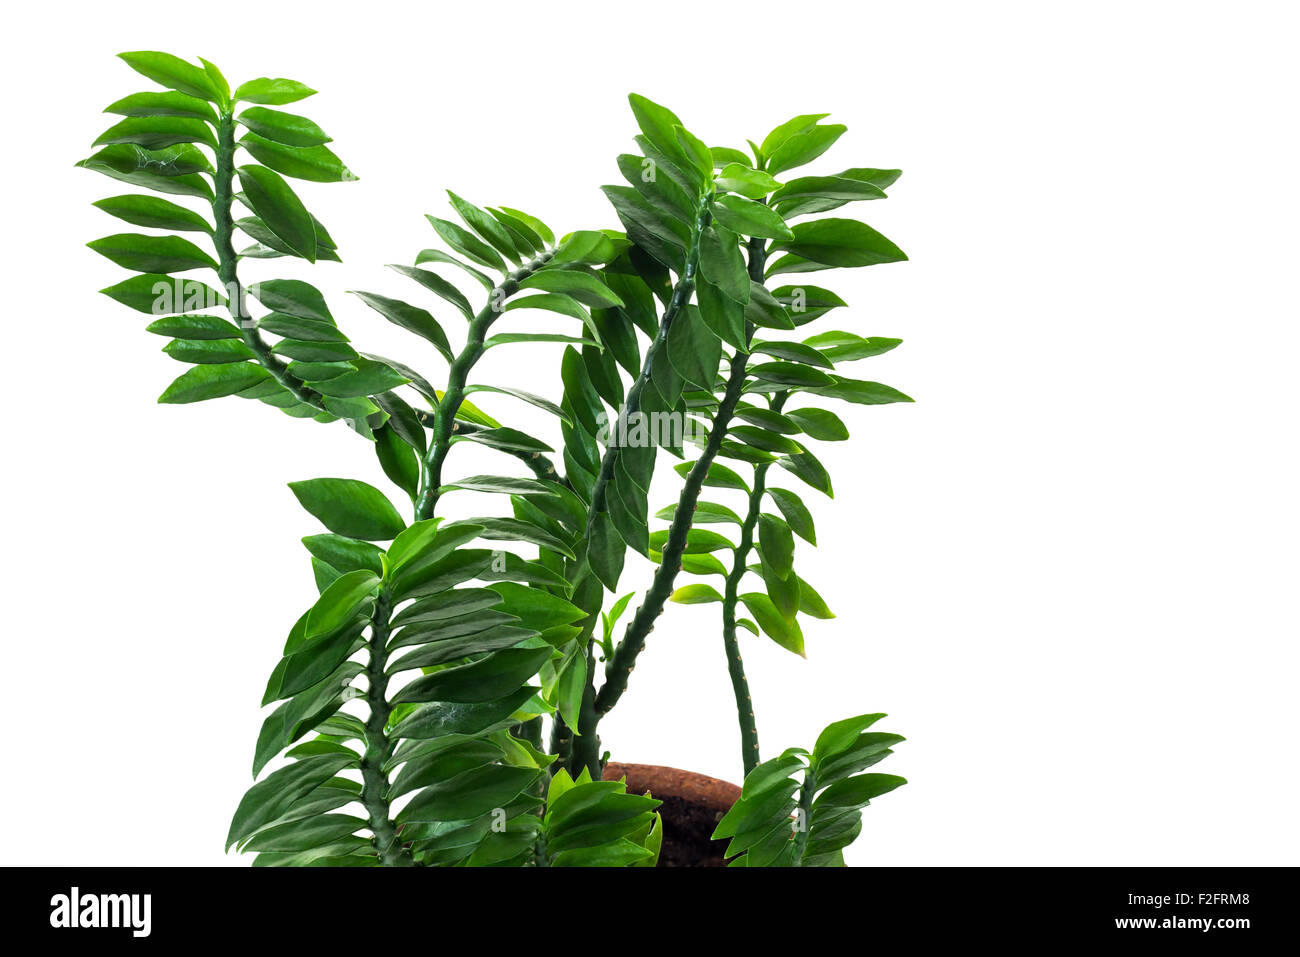 Pedilanthus Tithymaloides Nana or Green Devil's Backbone, herbal plant isolate on white background and clipping path Stock Photo